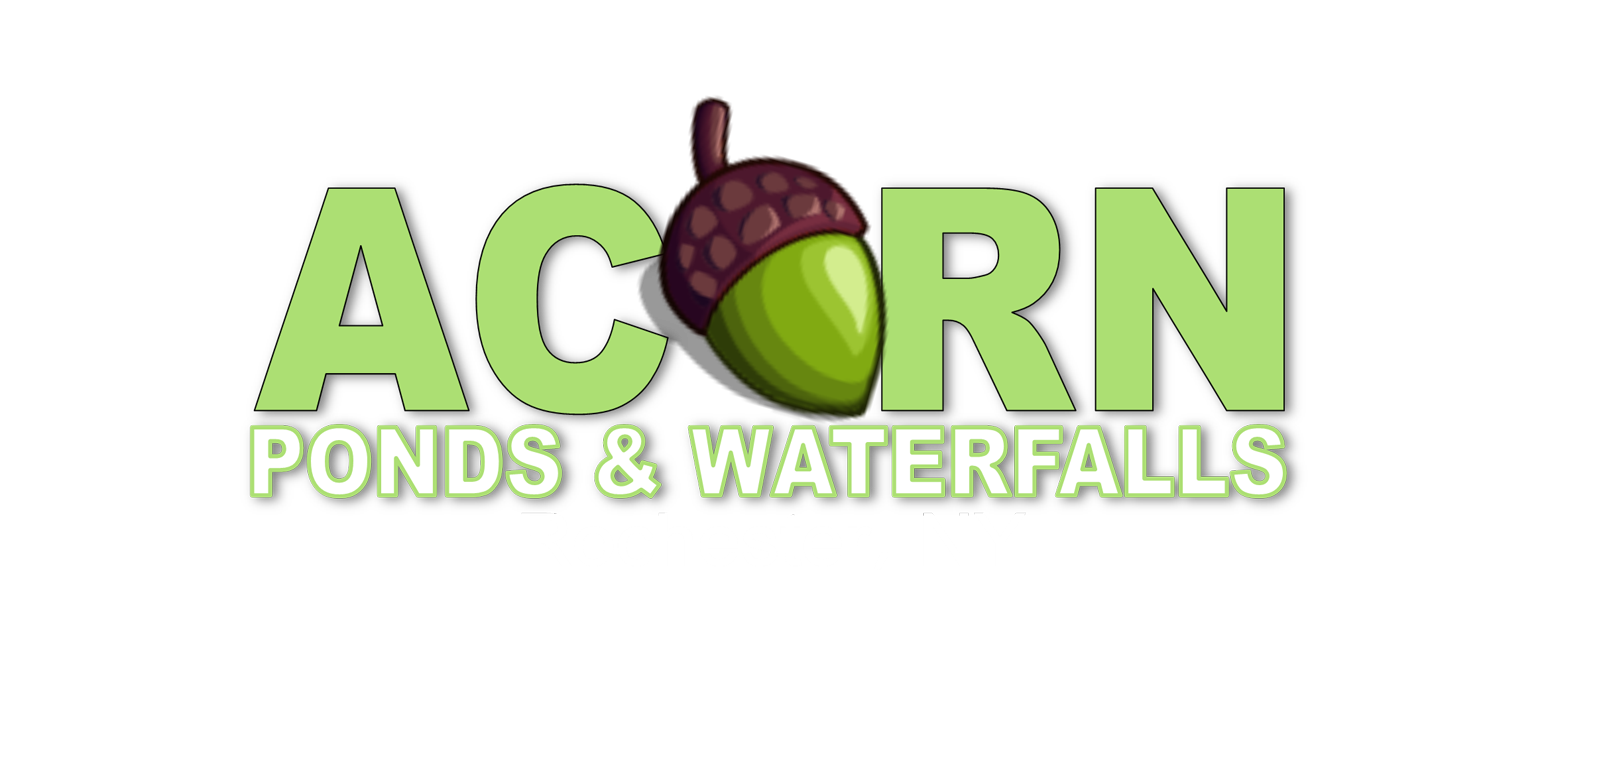 Pond Pumps, Plumbing & Filter Experts Of Rochester NY - Acorn Ponds & Waterfalls